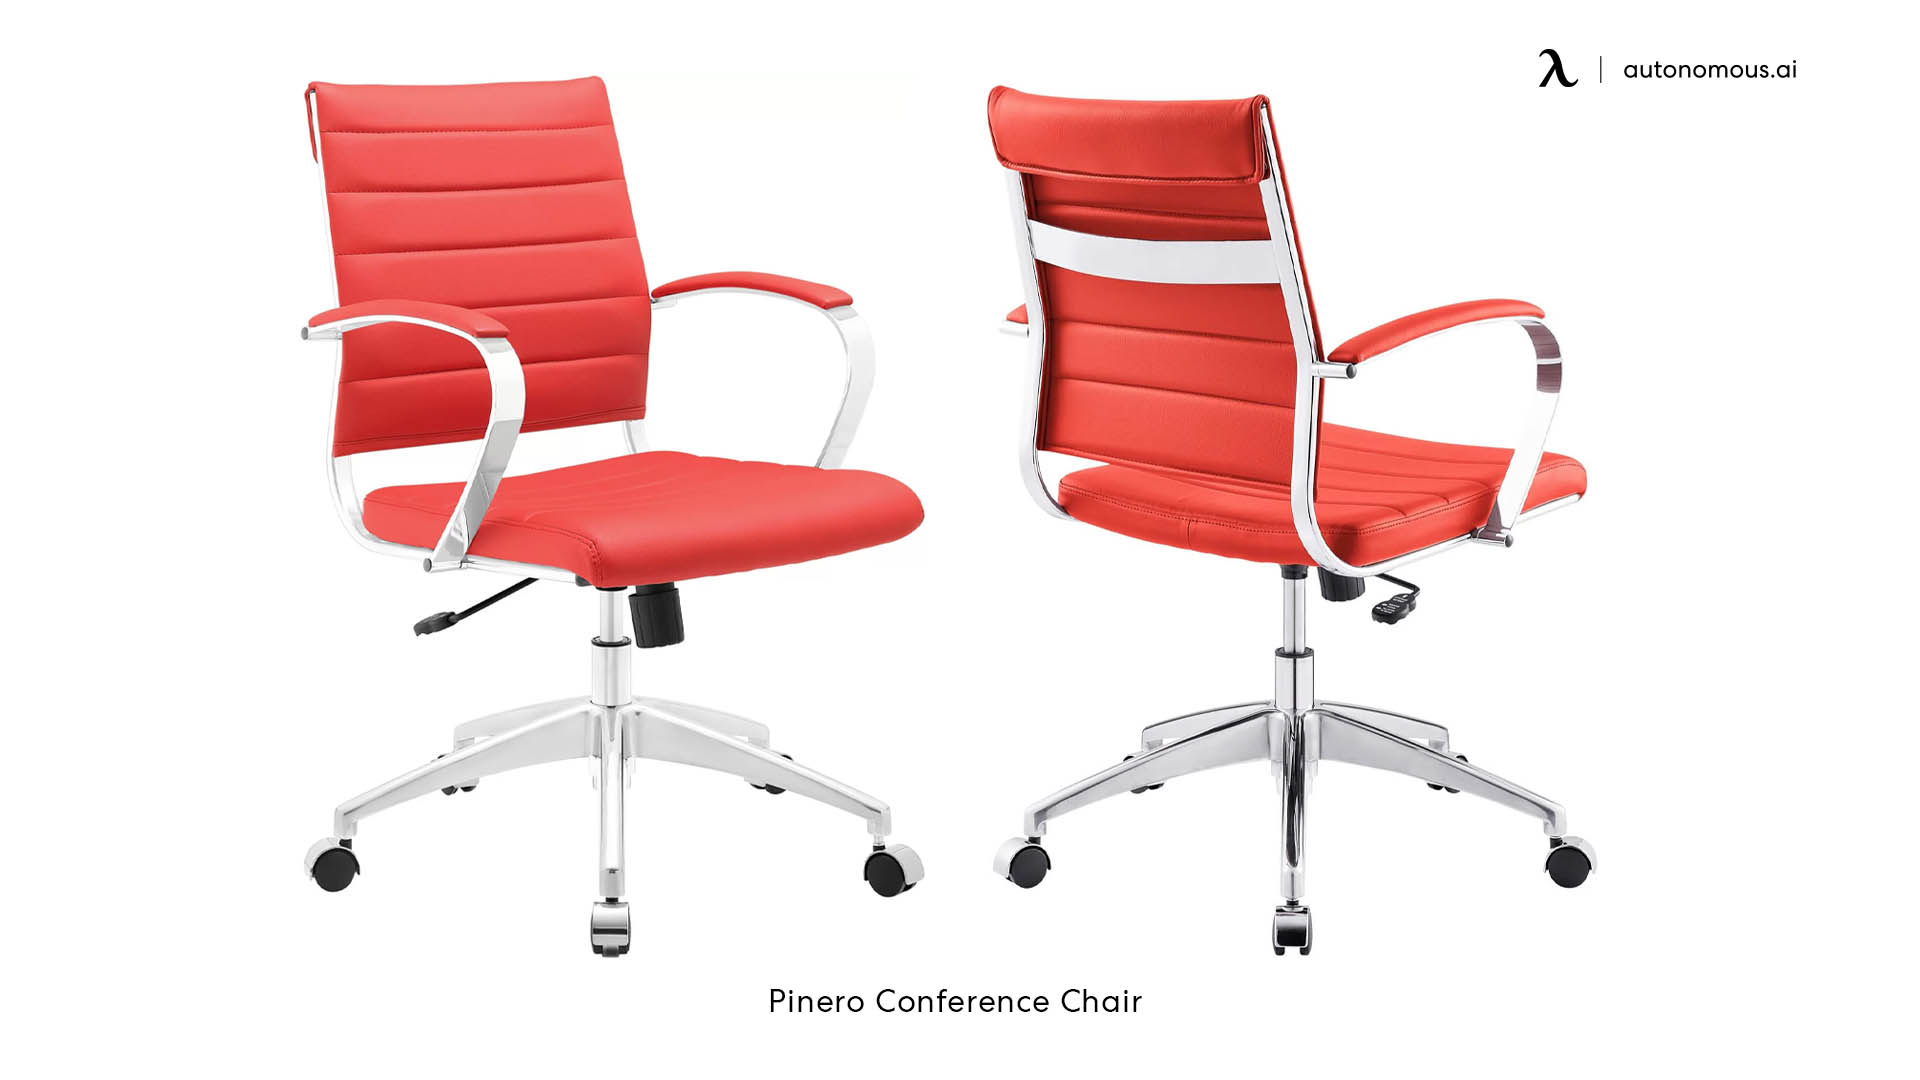 Pinero Conference Chair